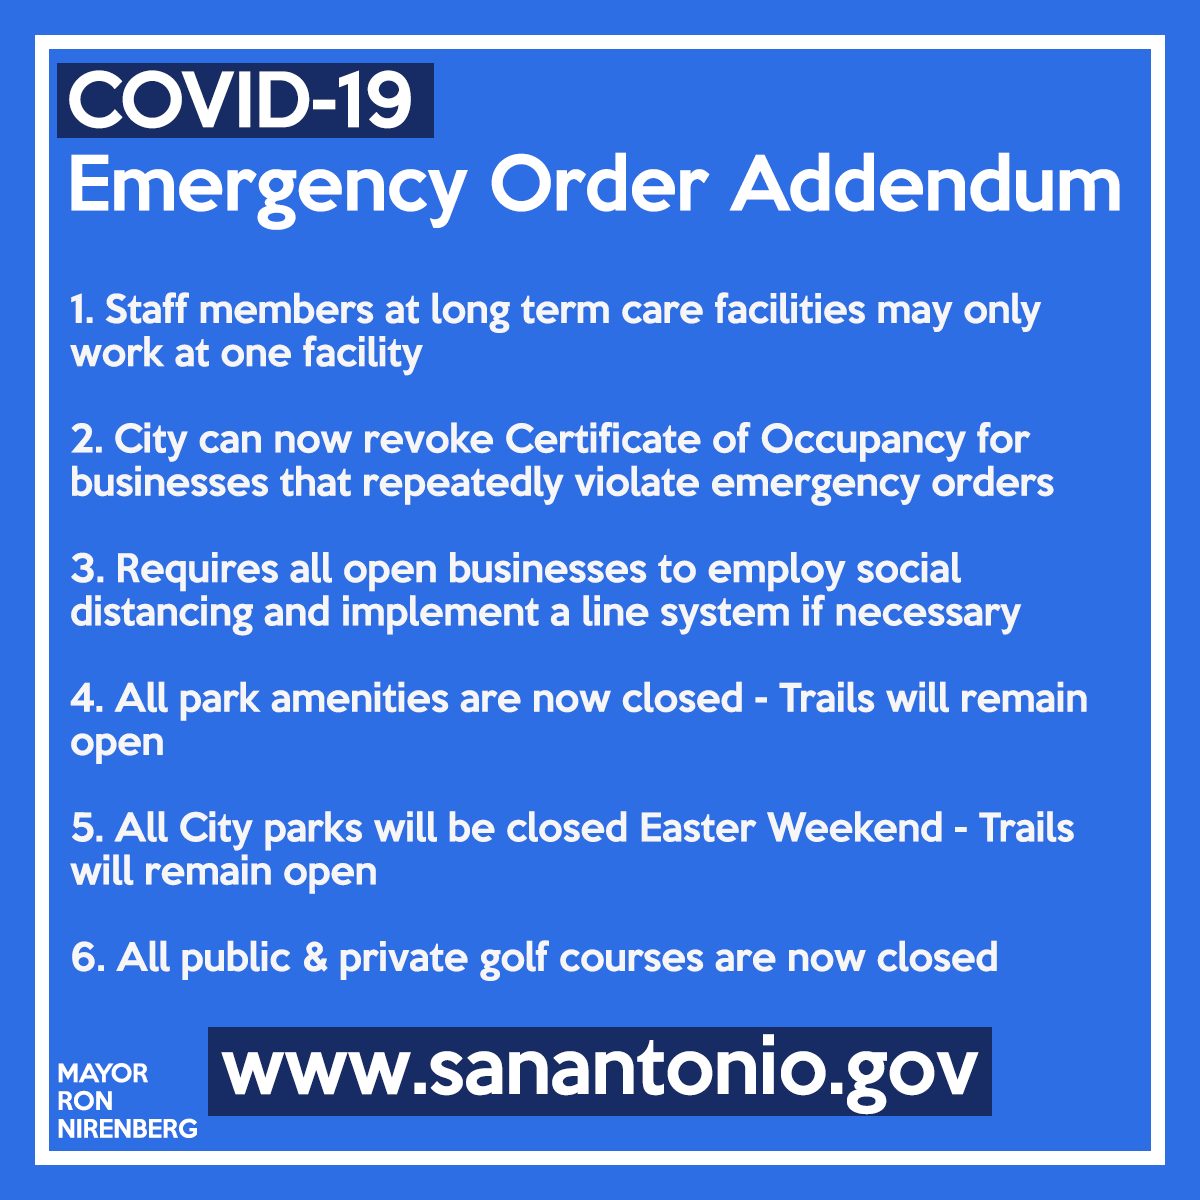 EMERGENCY ORDER EXTENSION:City Council has voted to extend our emergency order through April 30. Full order:  https://sanantonio.gov/Portals/0/Files/health/COVID19/Website%20Docs/Emergency%20Declaration%20No.%205.pdfAddendum:  https://sanantonio.gov/Portals/0/Files/health/COVID19/Public%20Info/Fifth%20Declaration%20of%20Public%20Health%20Emergency%20Addendum.pdf12/16